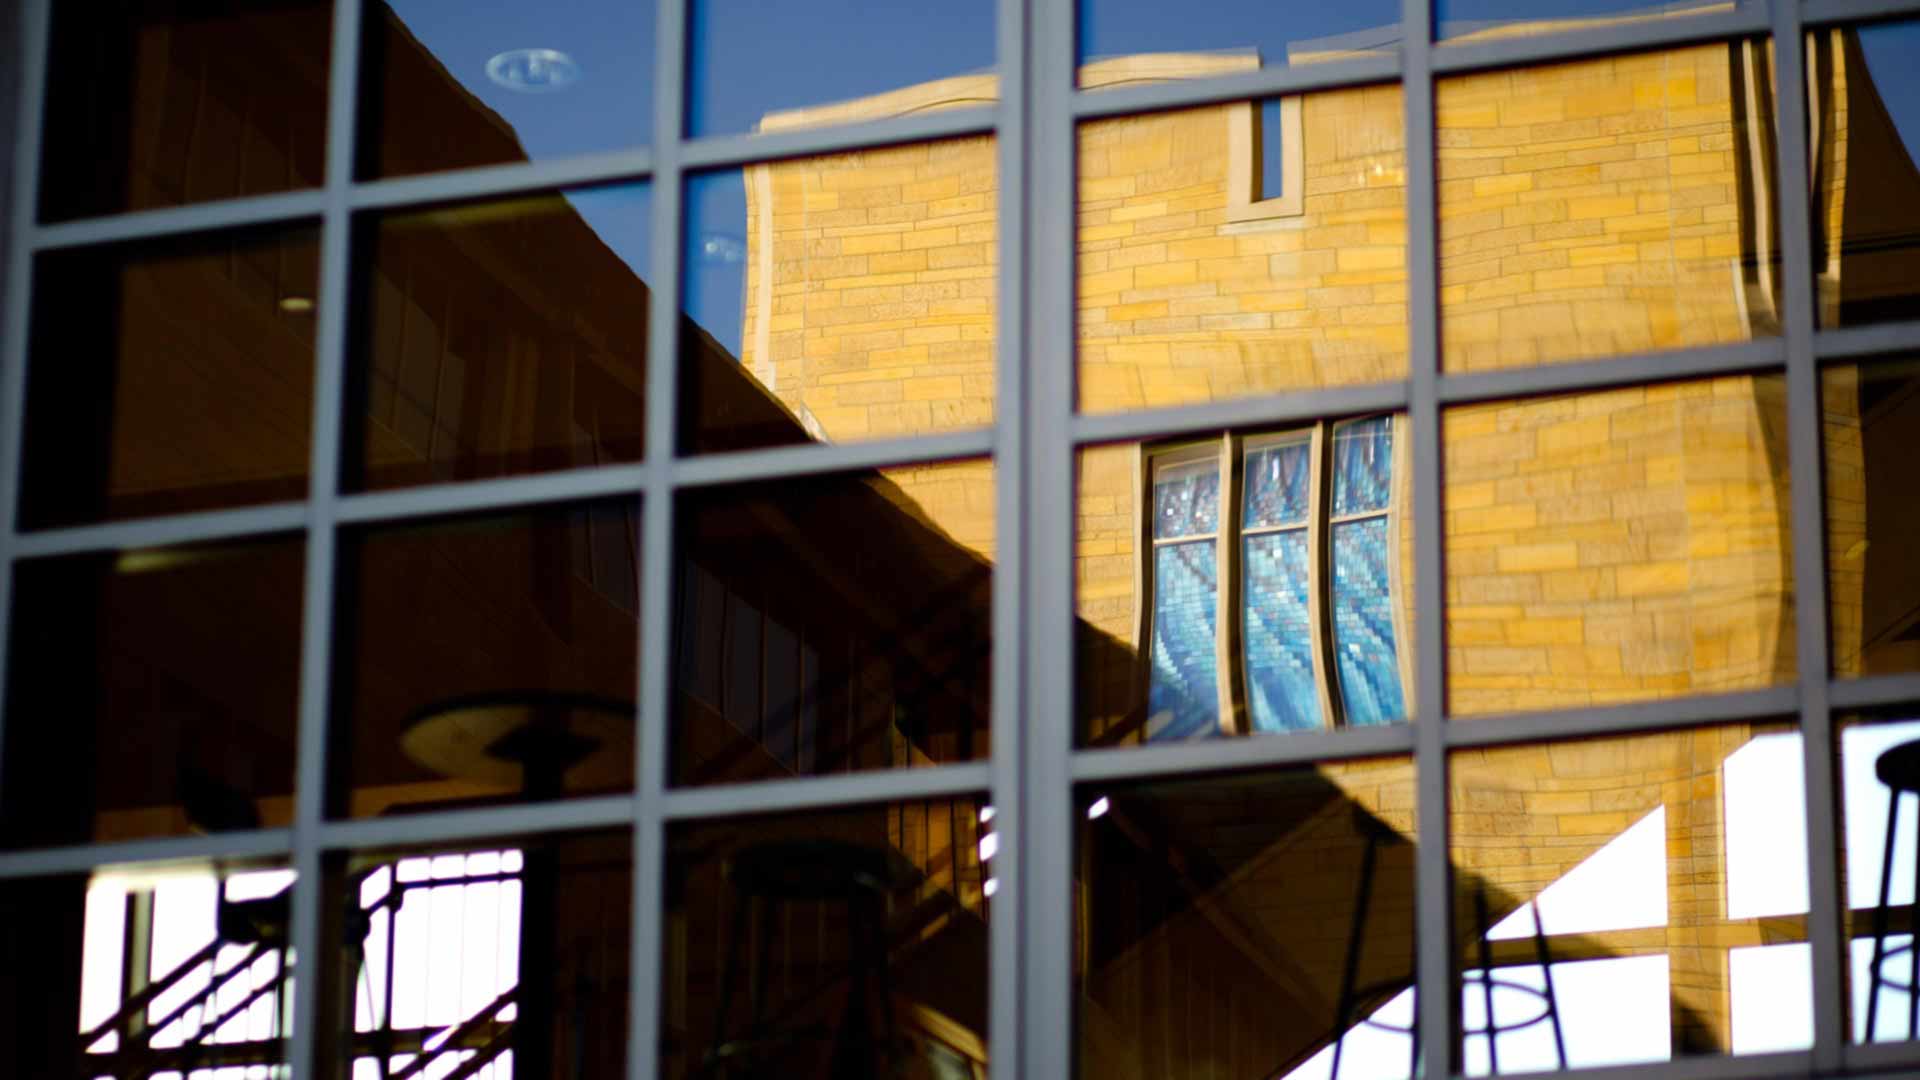 Owens Science Hall reflected in the windows of another building on the St. Thomas campus.